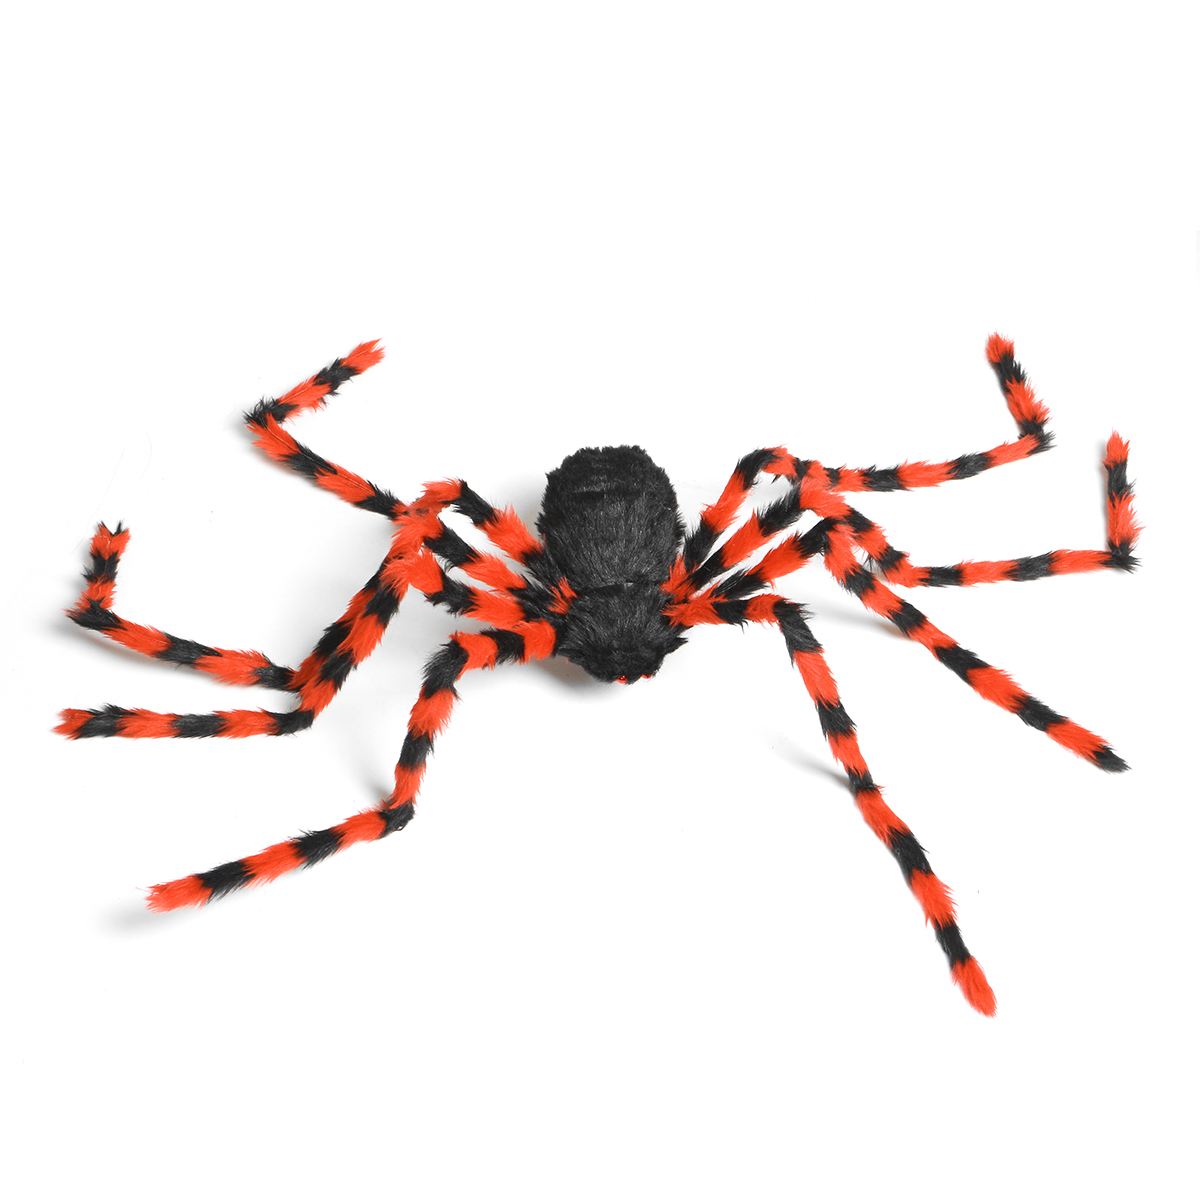 150cm-Horrible-Giant-Furry-Spider-Decorations-Halloween-Haunted-House-Prop-Gift-1589939-4